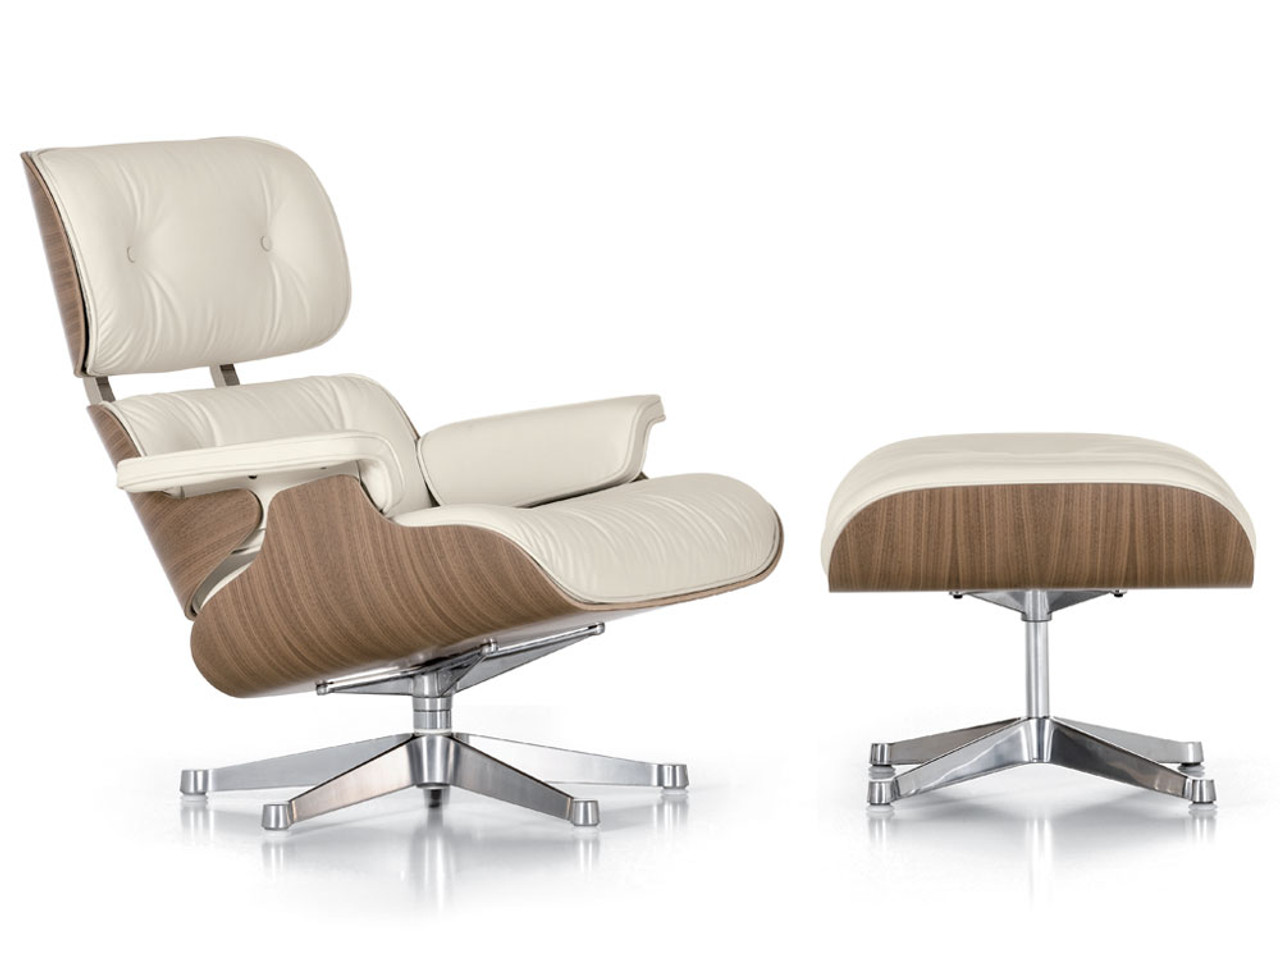 Vitra Eames Lounge Chair - White Walnut by Charles & Ray Eames